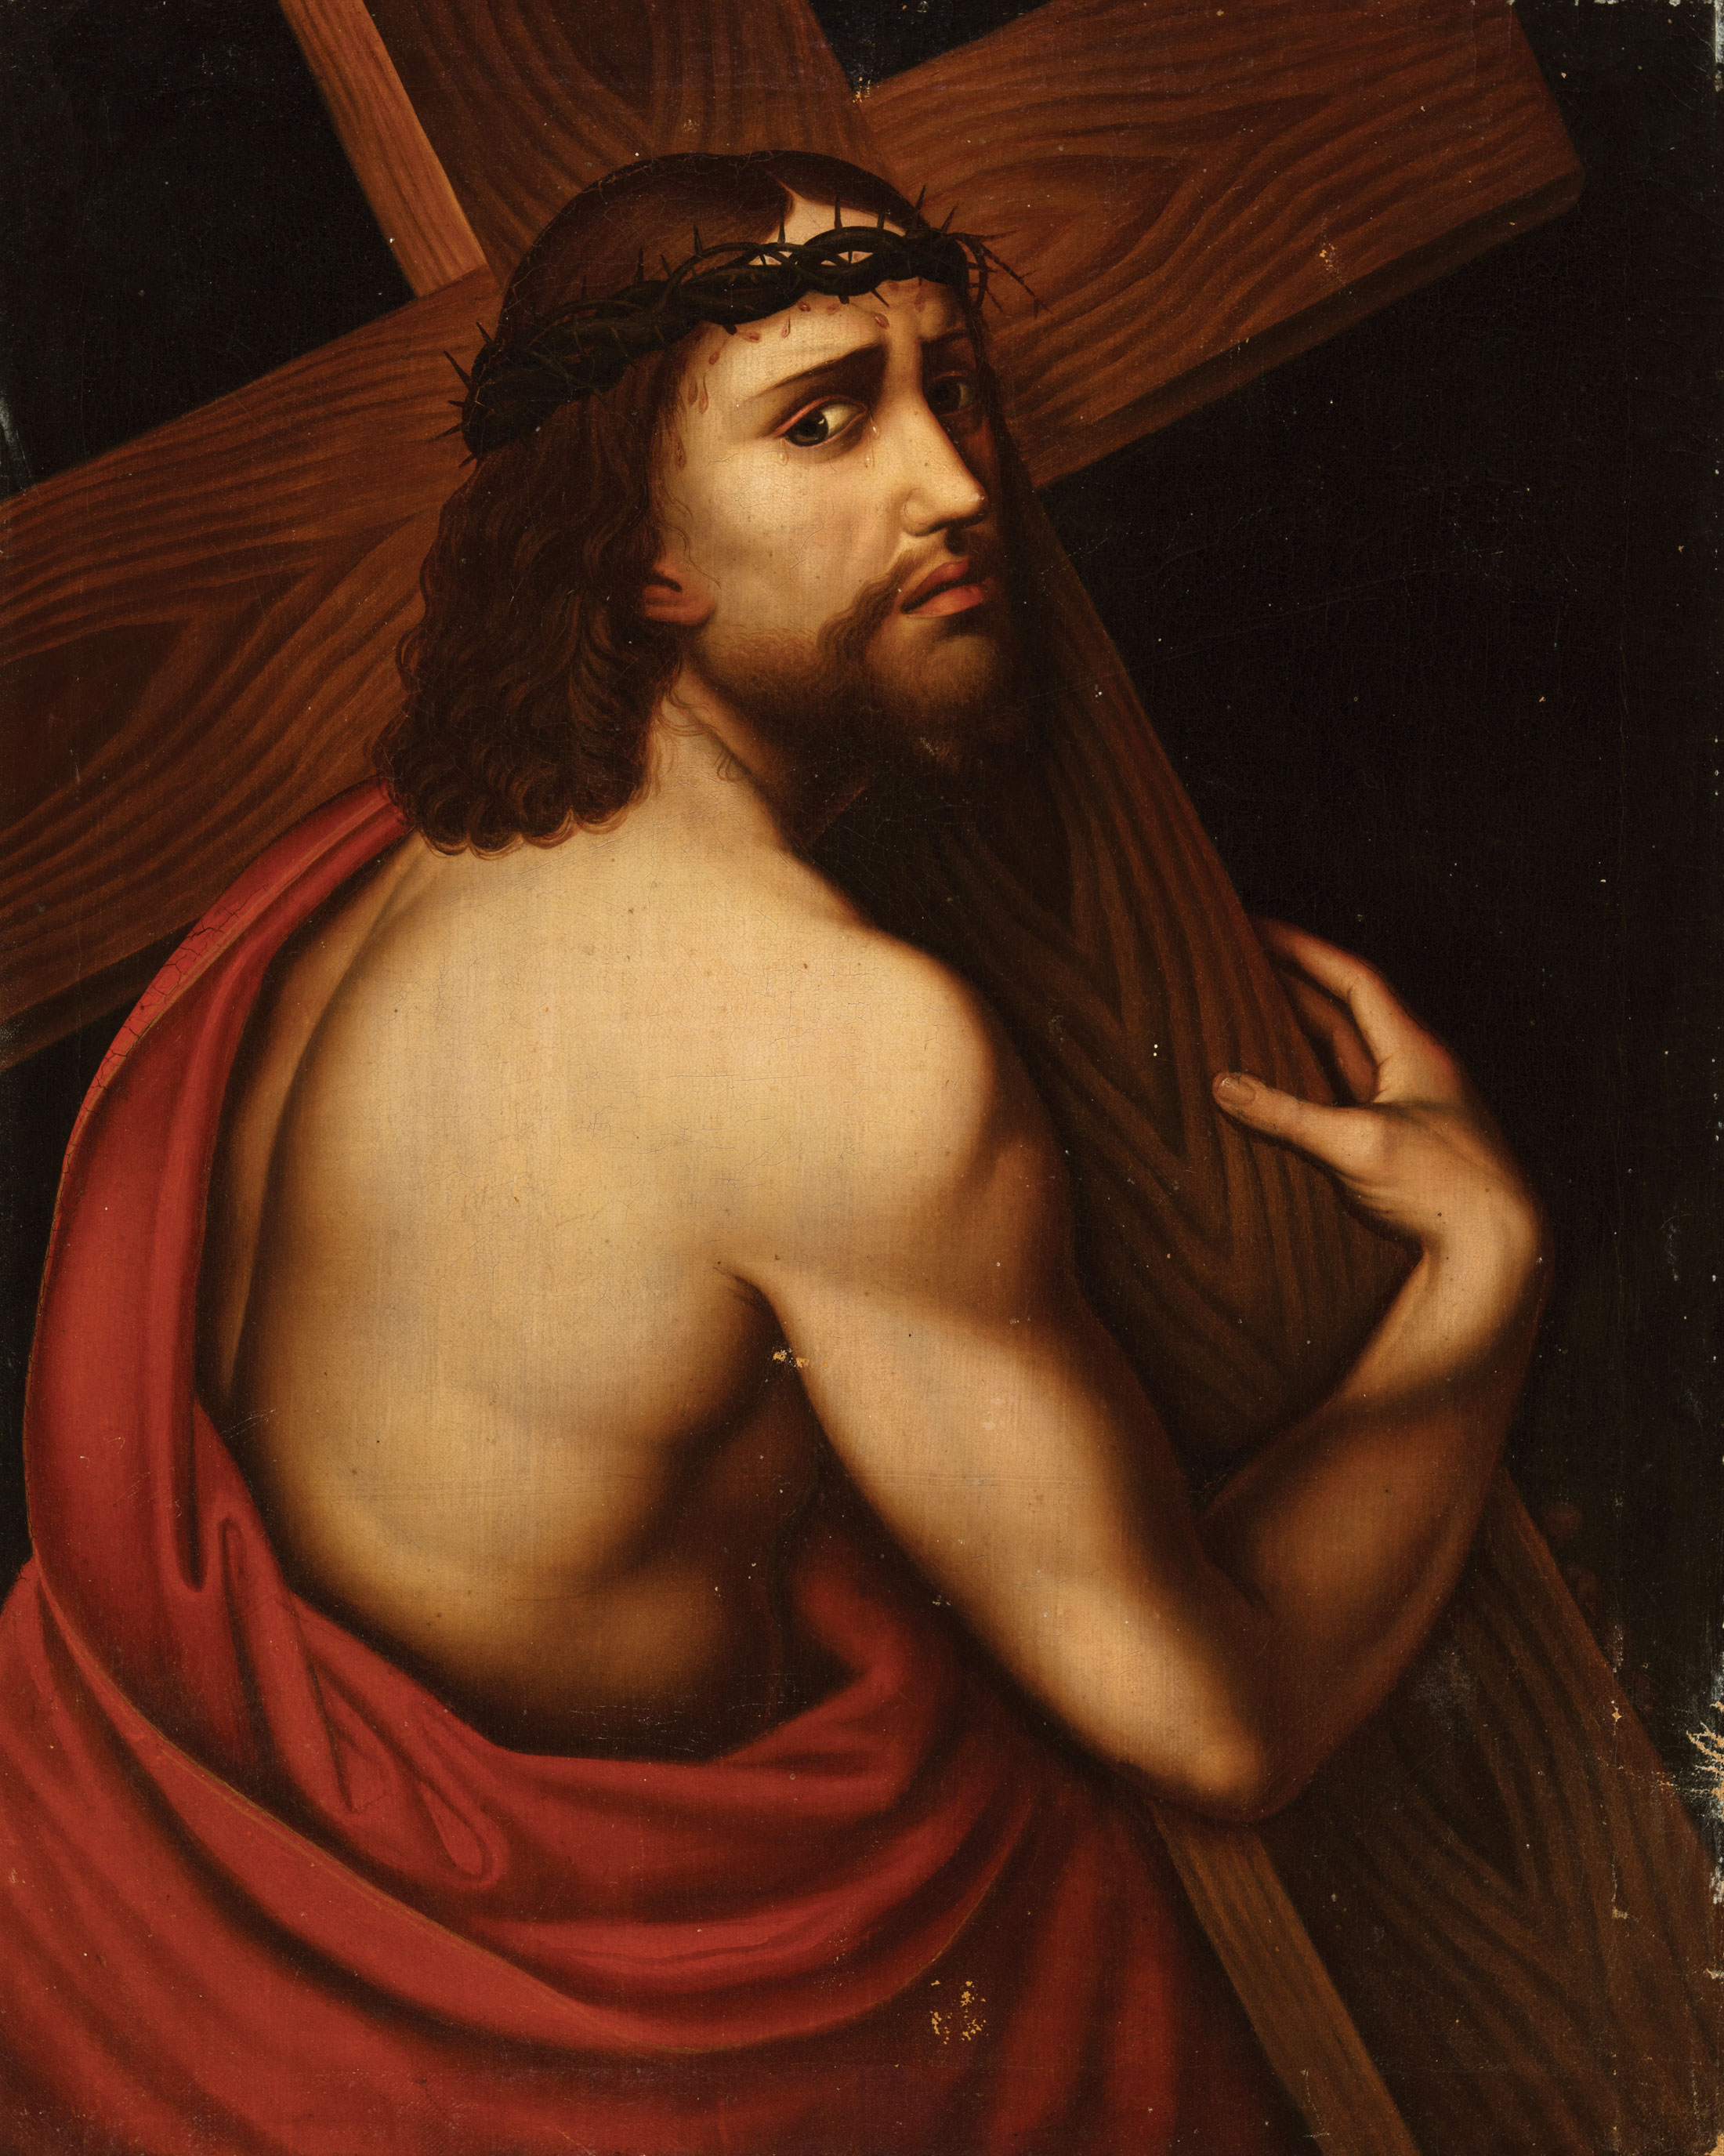 Continental School, 19th c ., "Jesus Carrying the Cross", oil on canvas, unsigned, 27 in. x 21 3/4